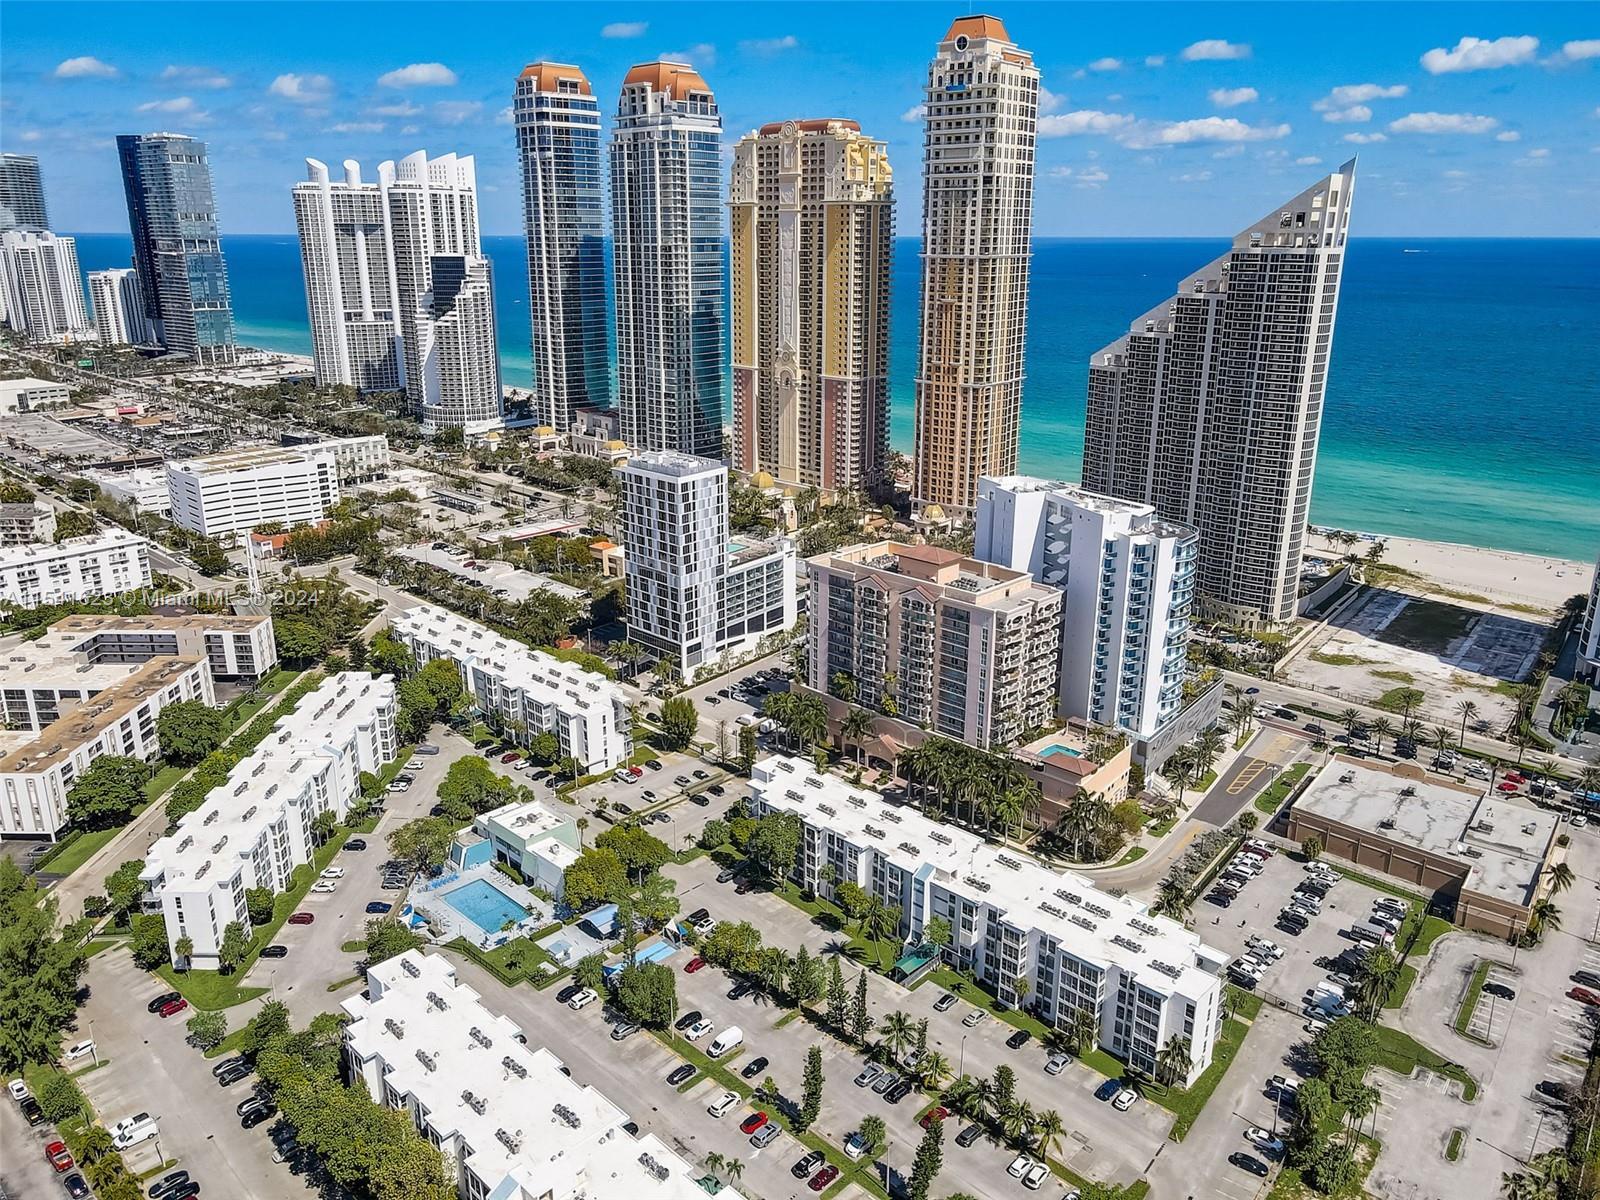 Property is located in the beautiful Sunny Isles. Spacious 1 bedroom, 1.5 bathrooms, with a den that